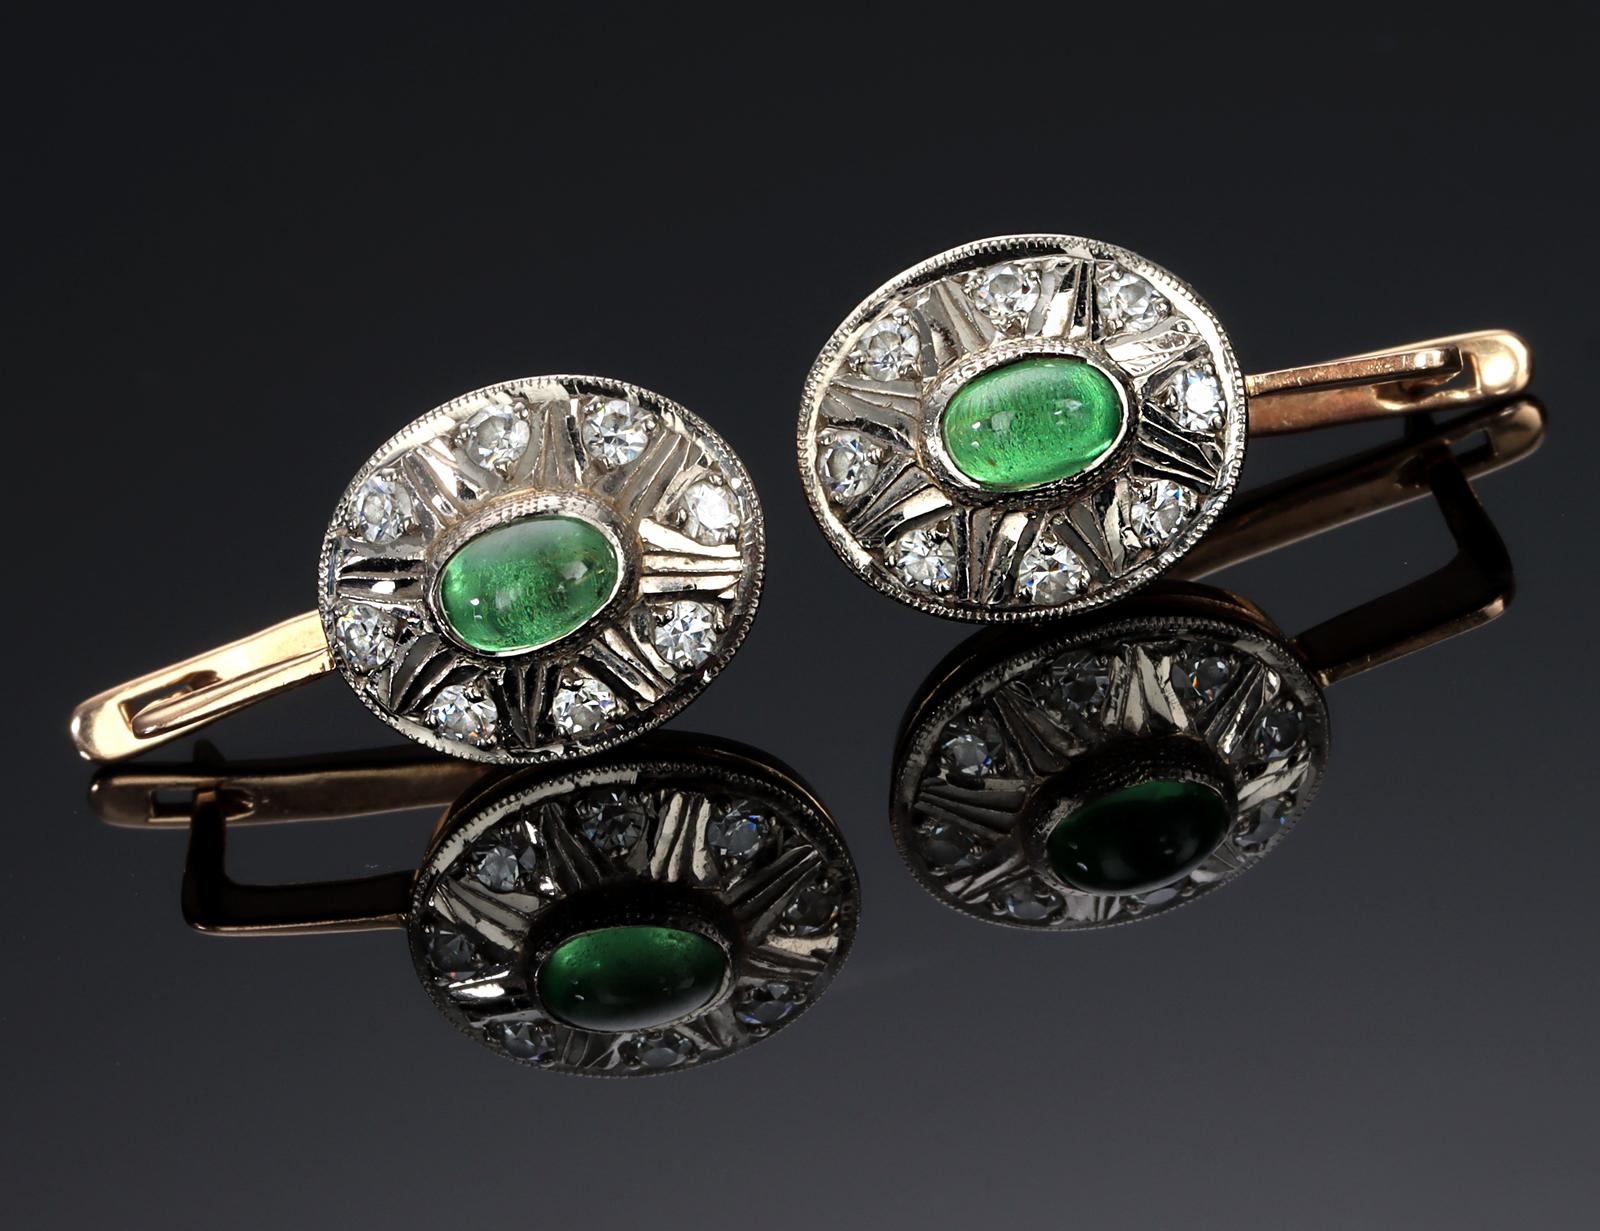 Vintage 14-carat gold earrings with silver elements, green cabochon-cut tsavorite and rosette-shaped goschenets.

Origin: Russia, mid-20th century (preserved hallmark for 0.585 gold after 1917, hammer and sickle in a star)

Two cabochon-cut